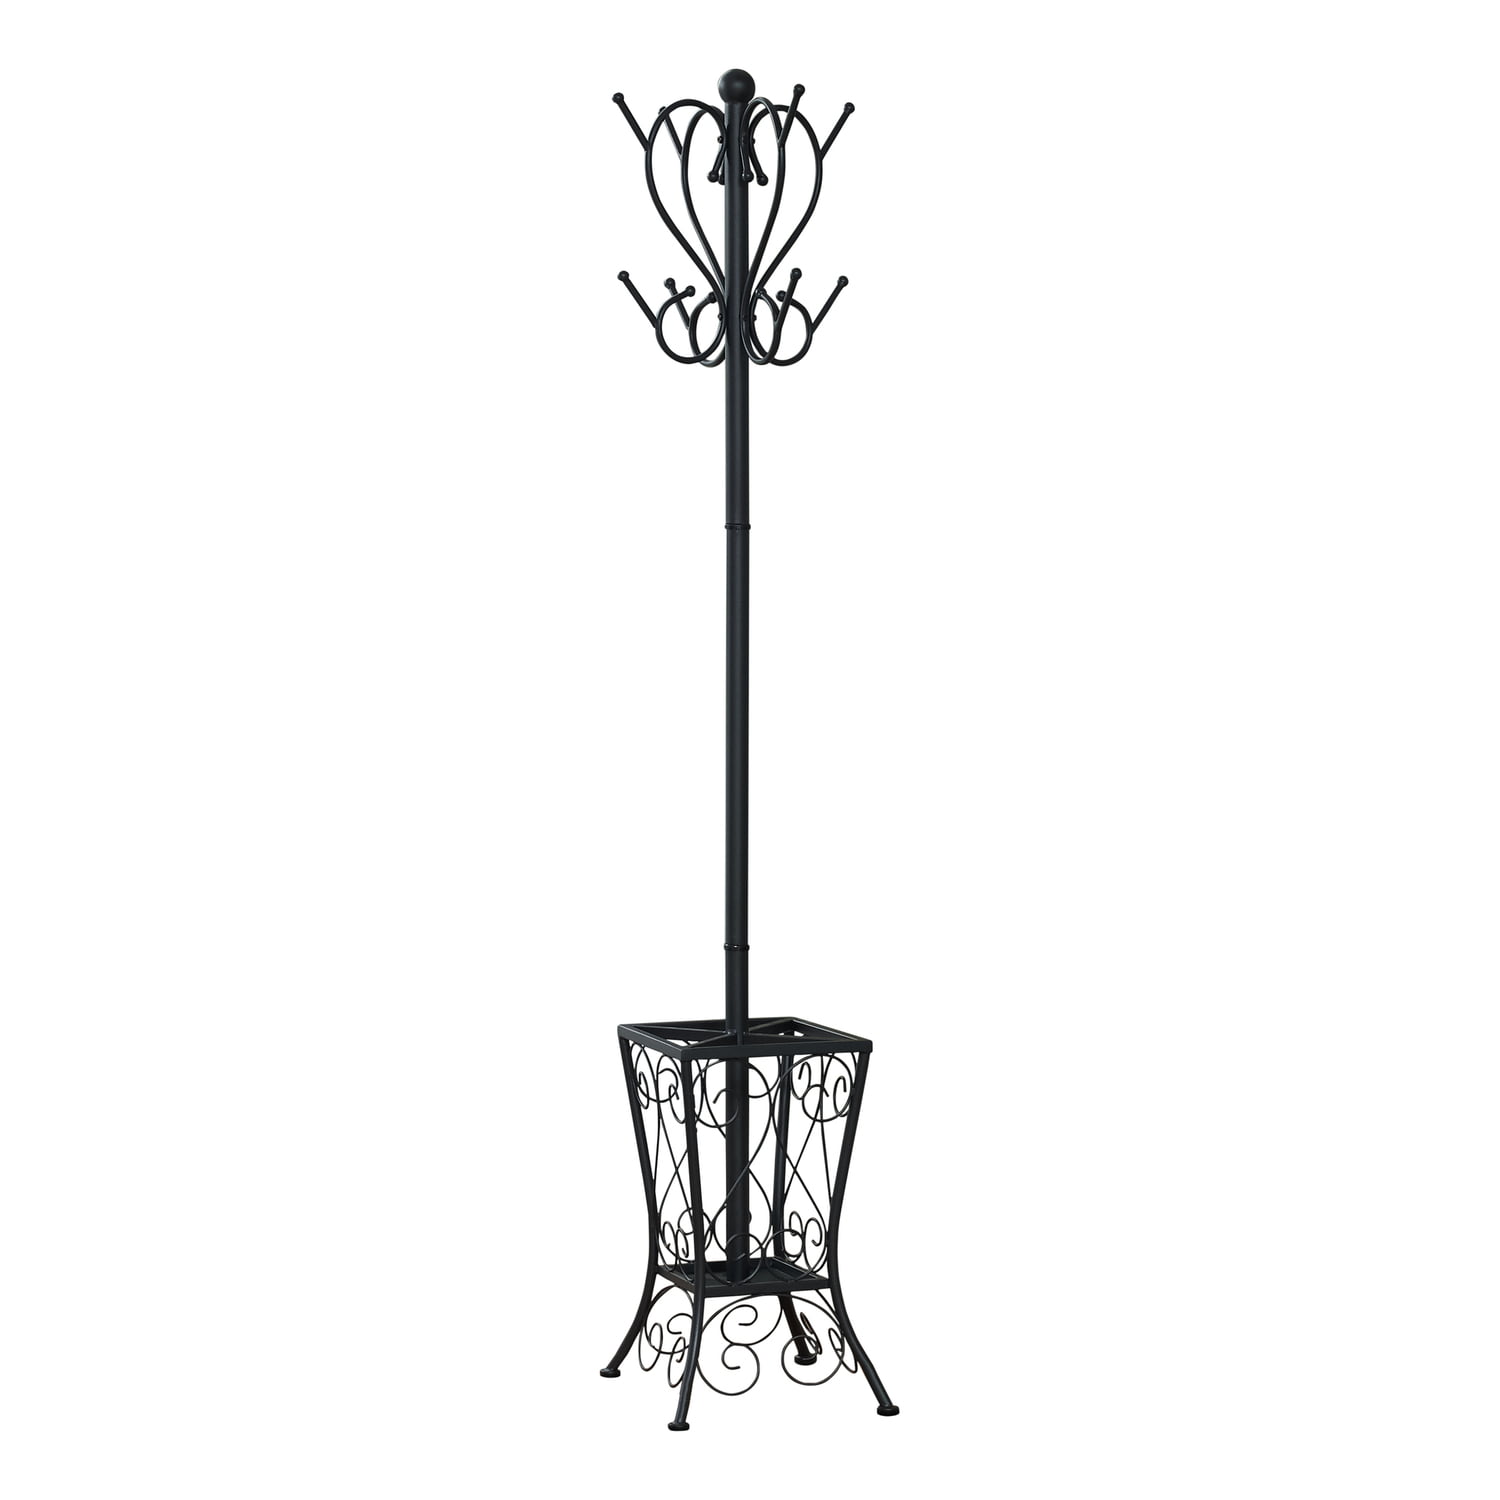 Better Homes & Gardens Traditional Metal Coat Rack With Umbrella Stand,  Bronze Finish